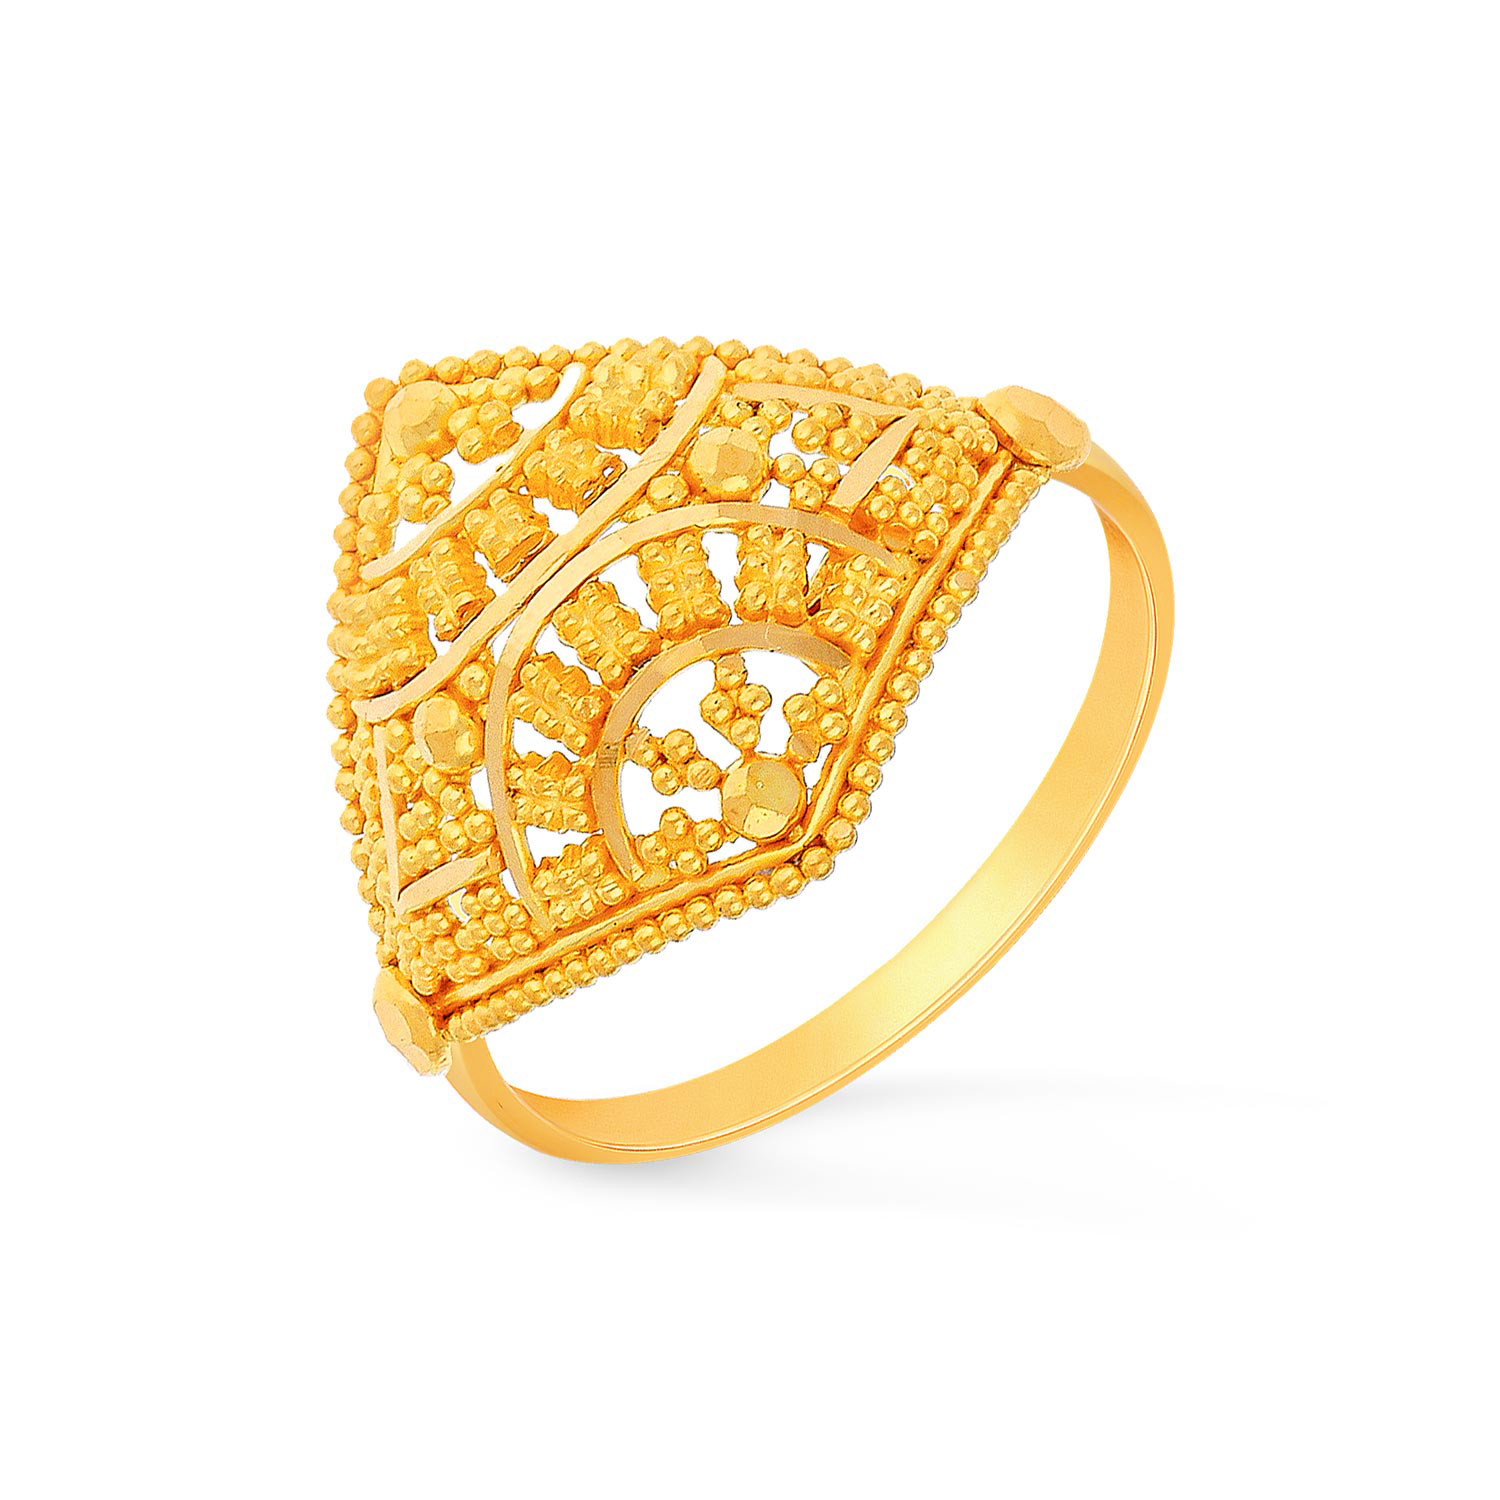 YouTube | Latest gold ring designs, Gold ring designs, Ring designs